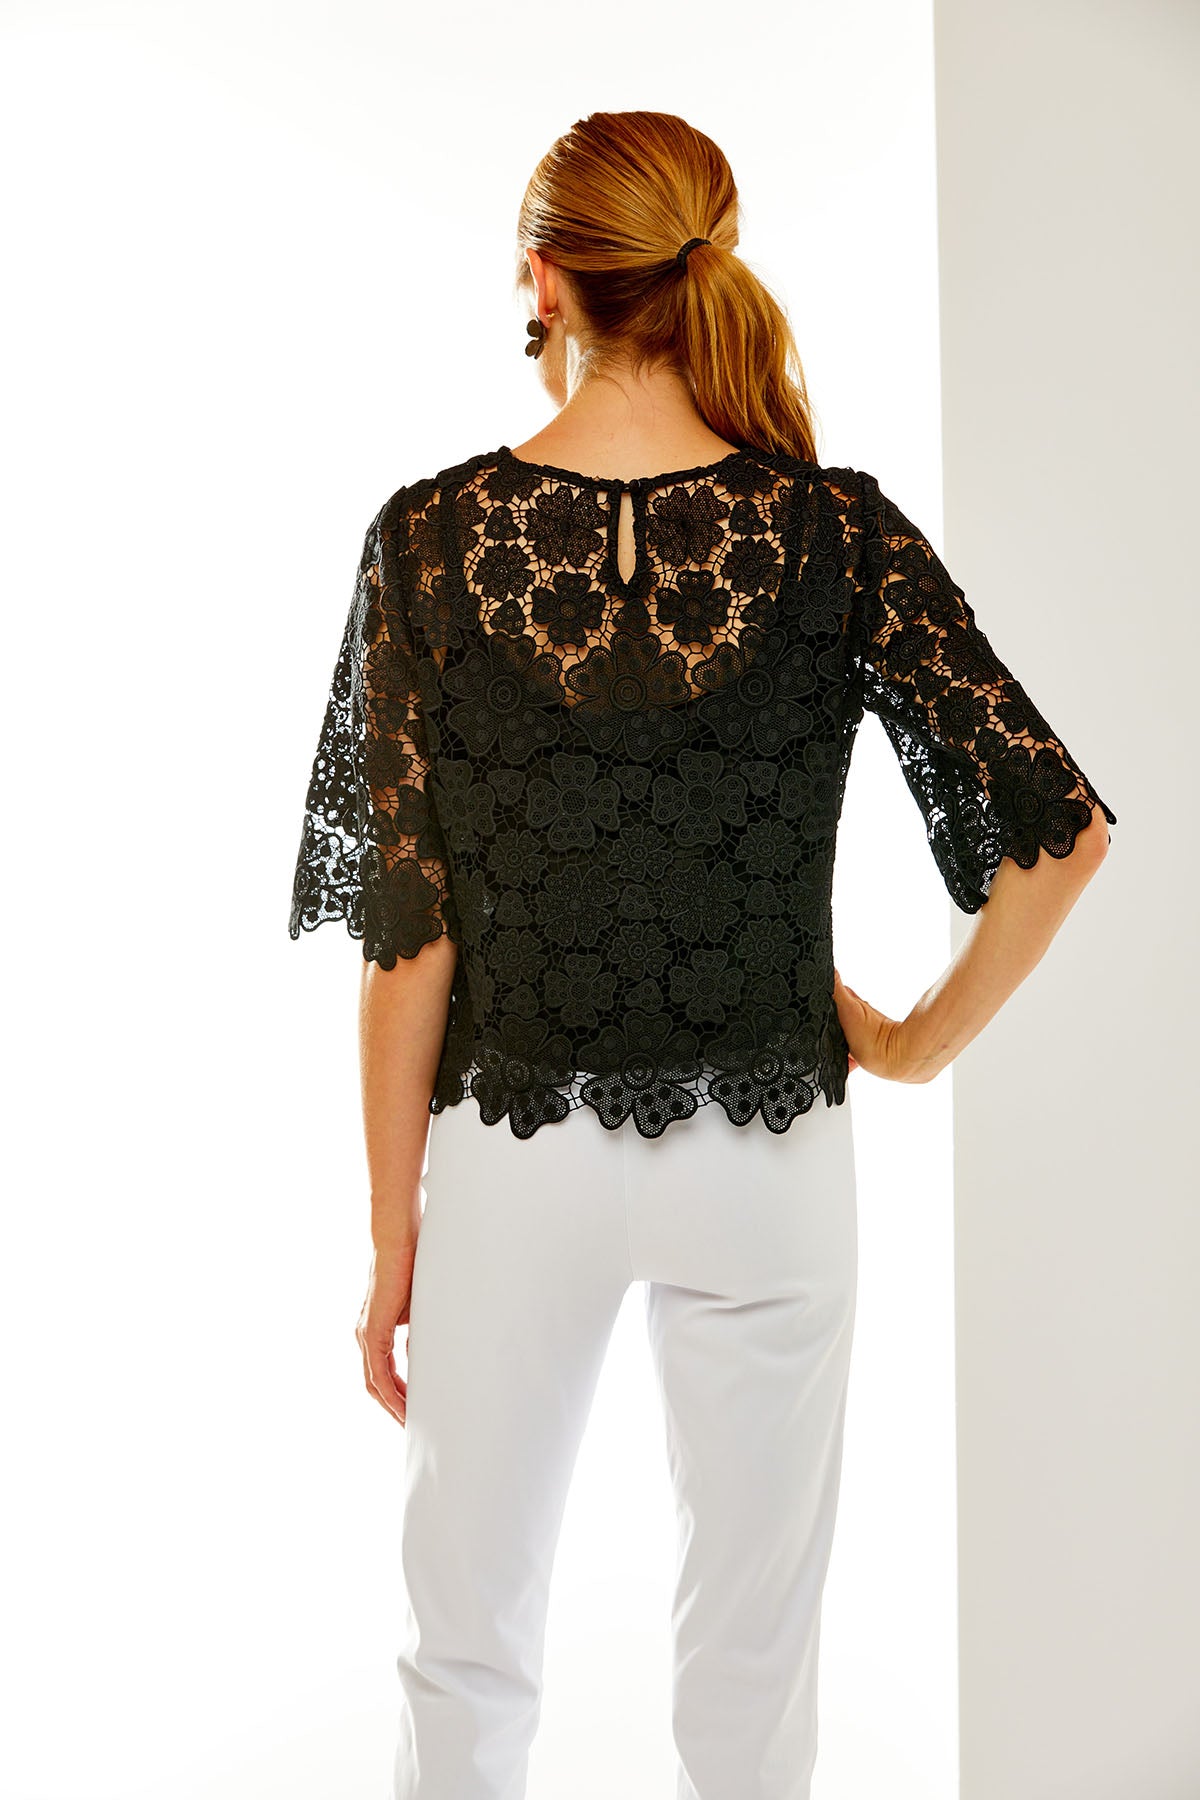 Woman in black lace top